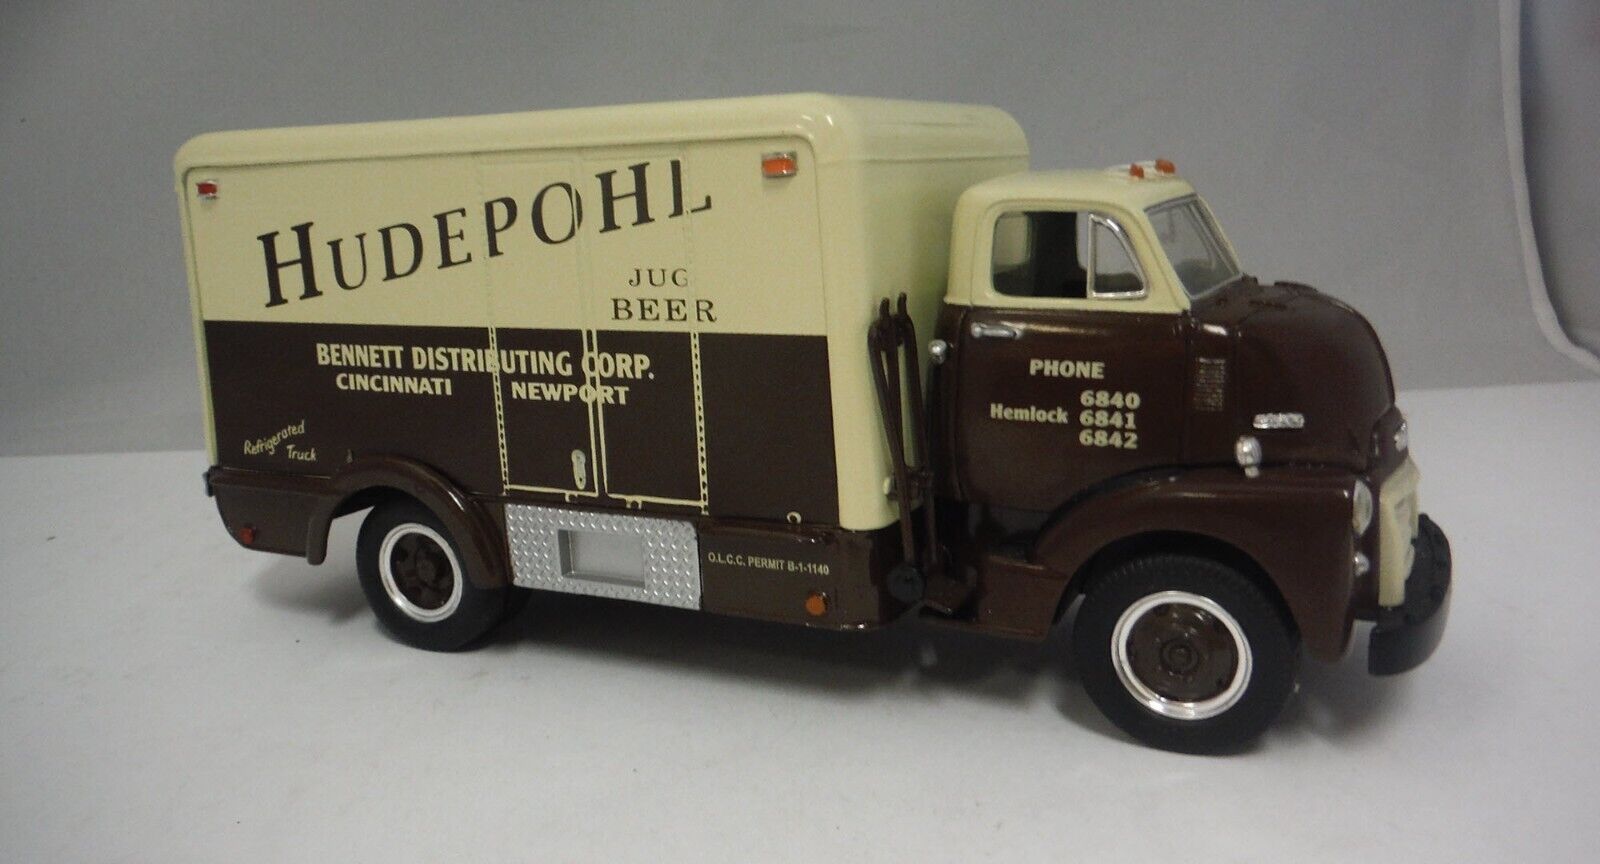 HUDEPOHL INSULATED GMC BEVERAGE TRUCK. FIRST GEAR